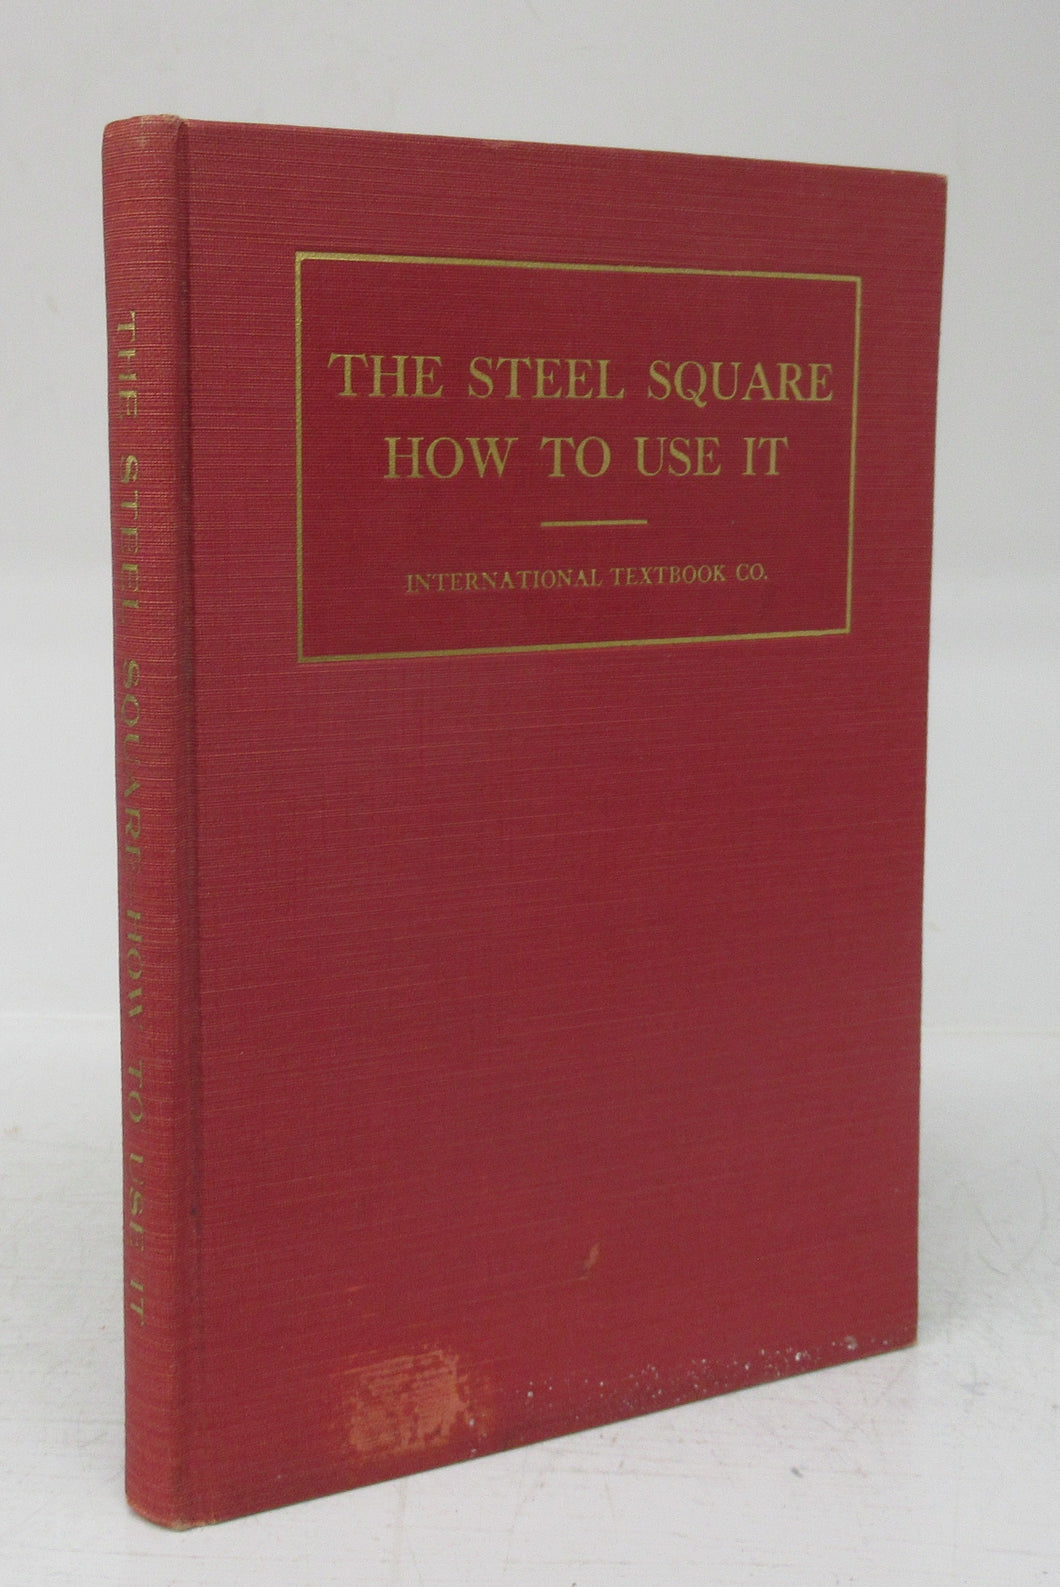 The Steel Square - How To Use It